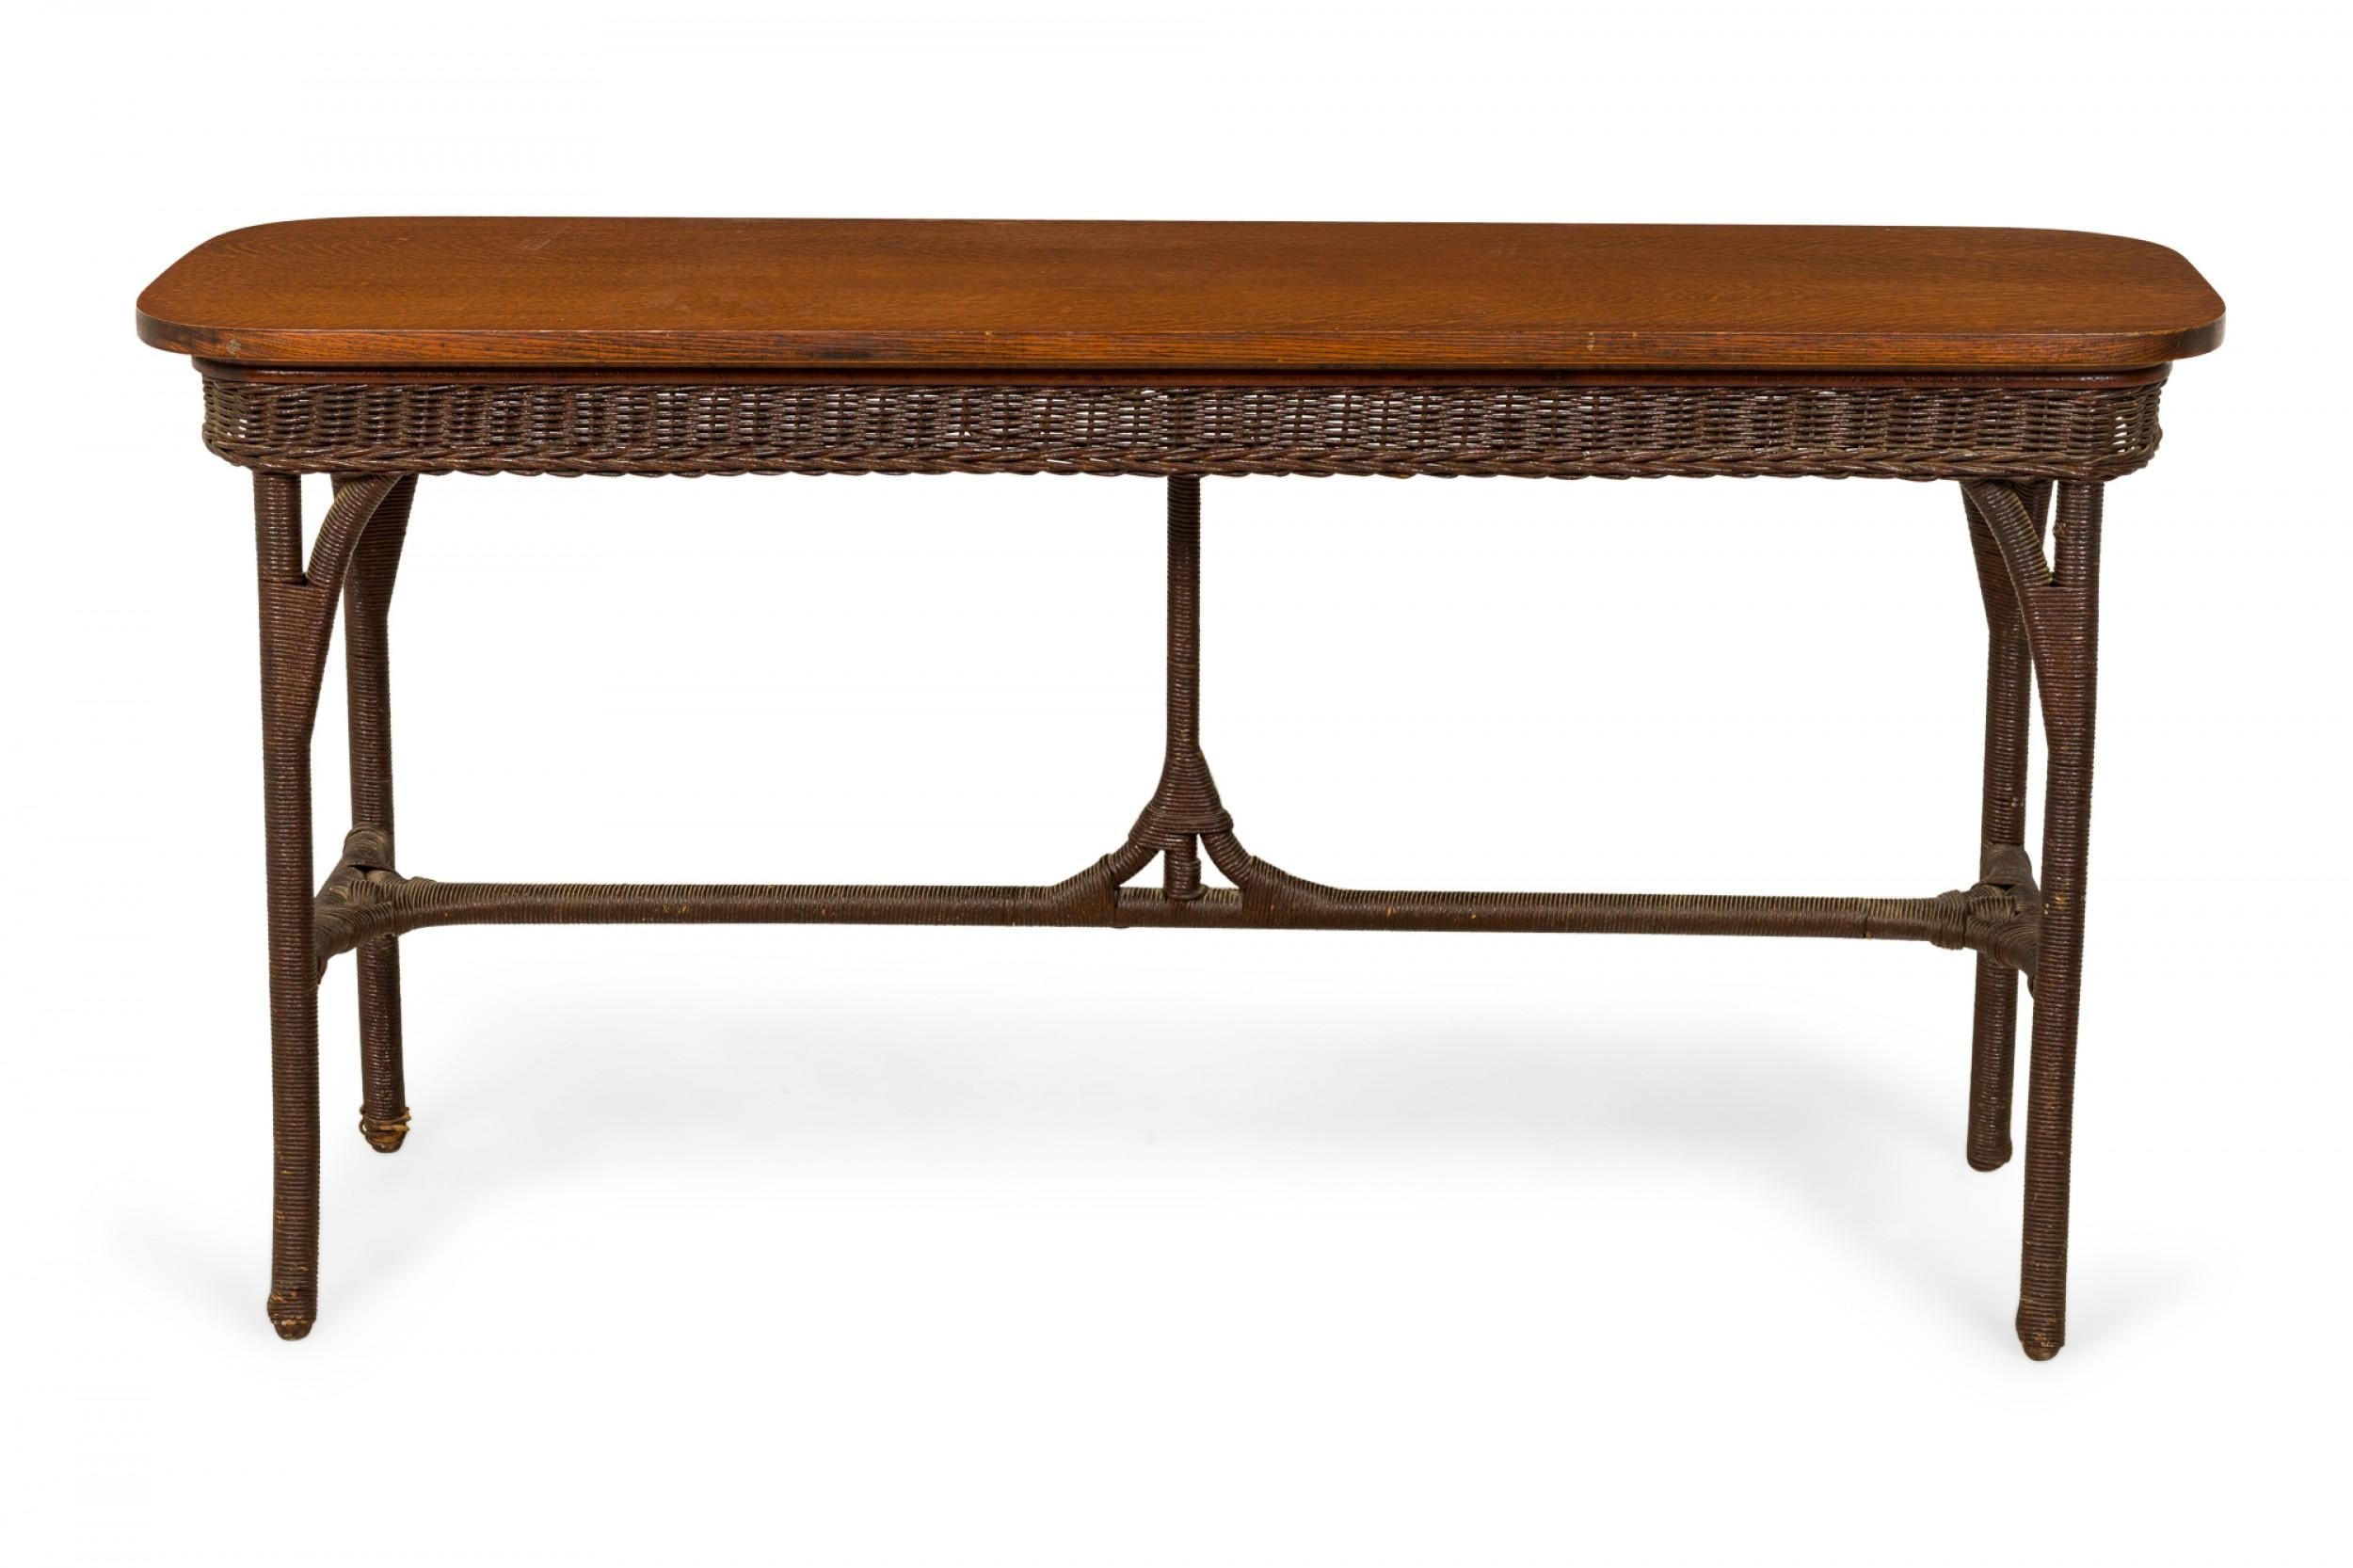 American wicker (1940s) and oak console / davenport table with a rectangular solid oak top with rounded corners atop a dark brown painted wicker-wrapped base with a decorative wicker apron, sabre legs, and a stretcher base with central support.